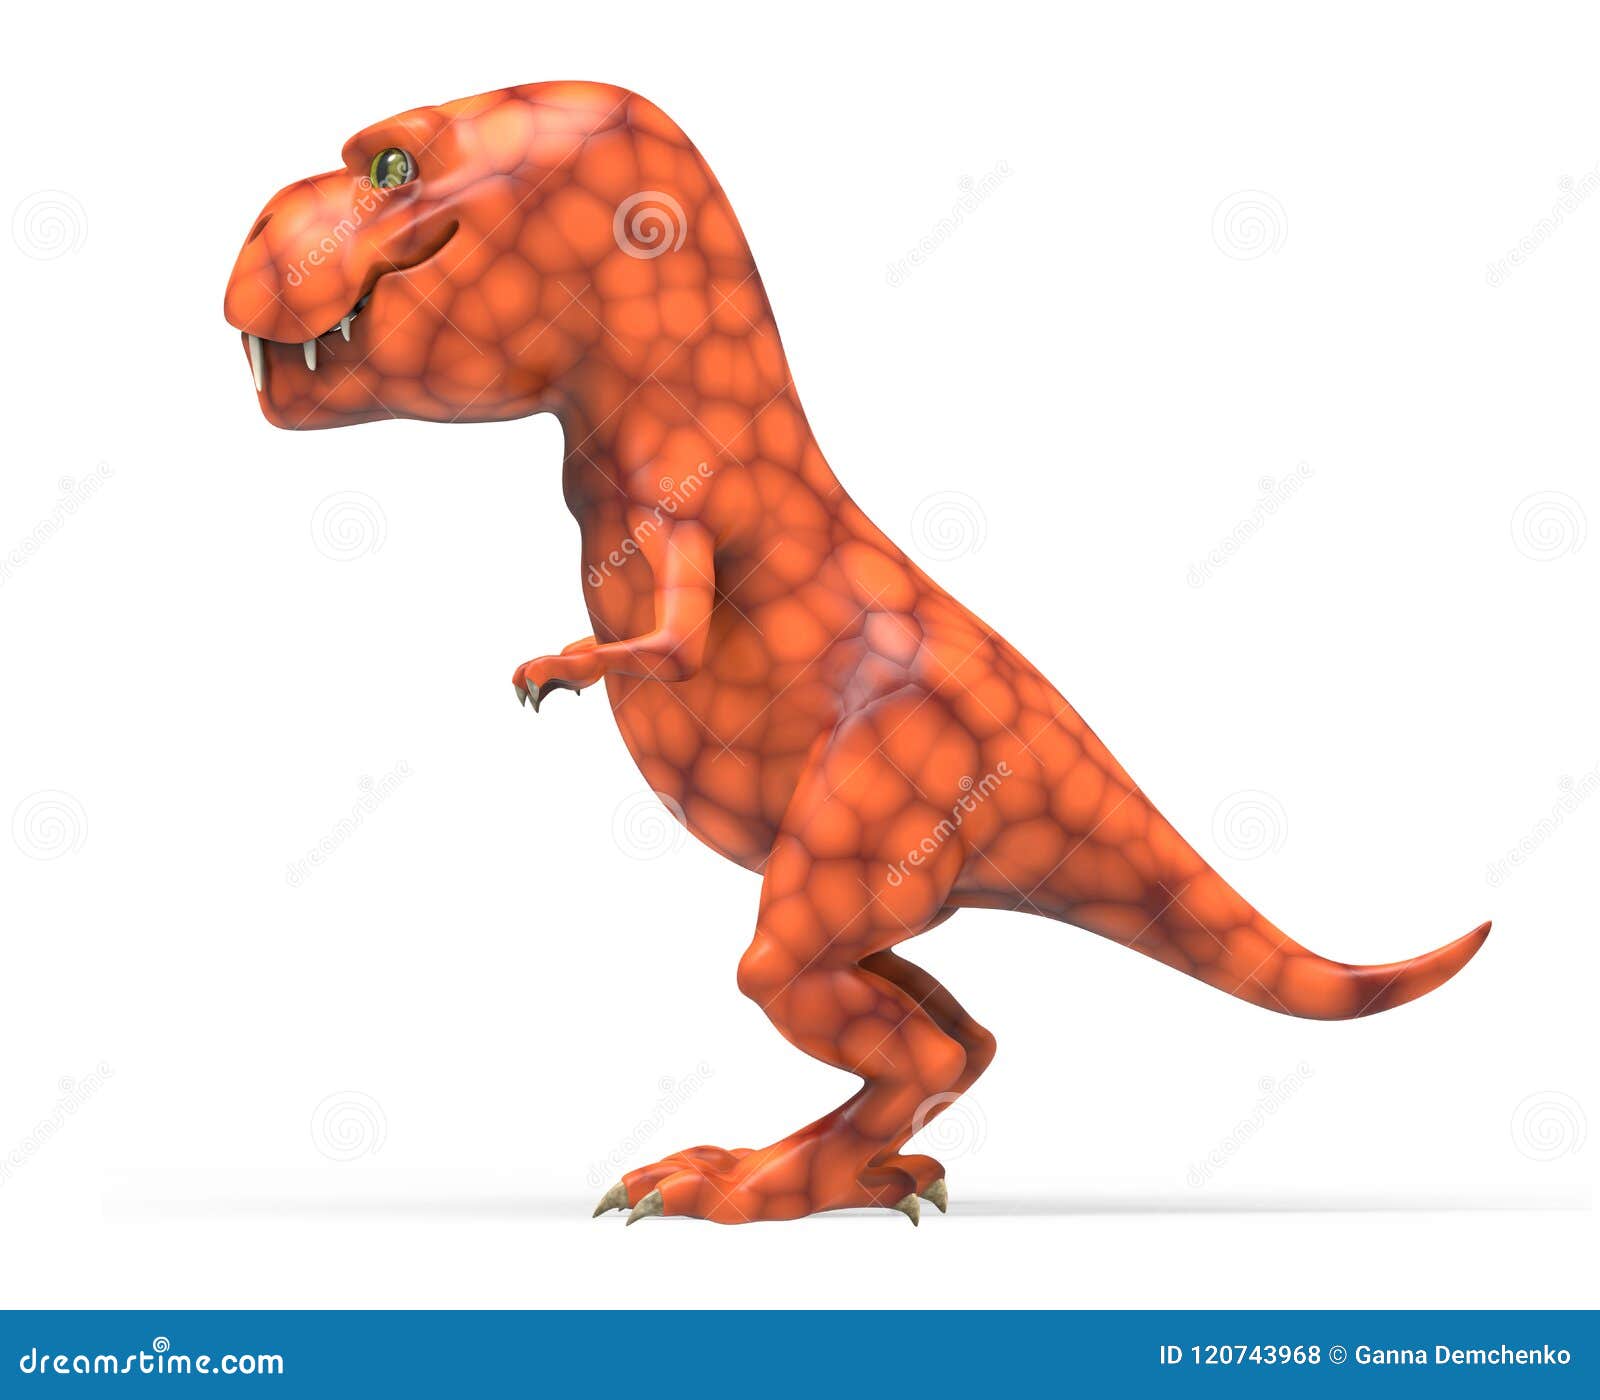 Hilarious 3d Dino With Chubby Build On The Run Background, 3d Cartoon, 3d  Character, 3d Illustrations Background Image And Wallpaper for Free Download